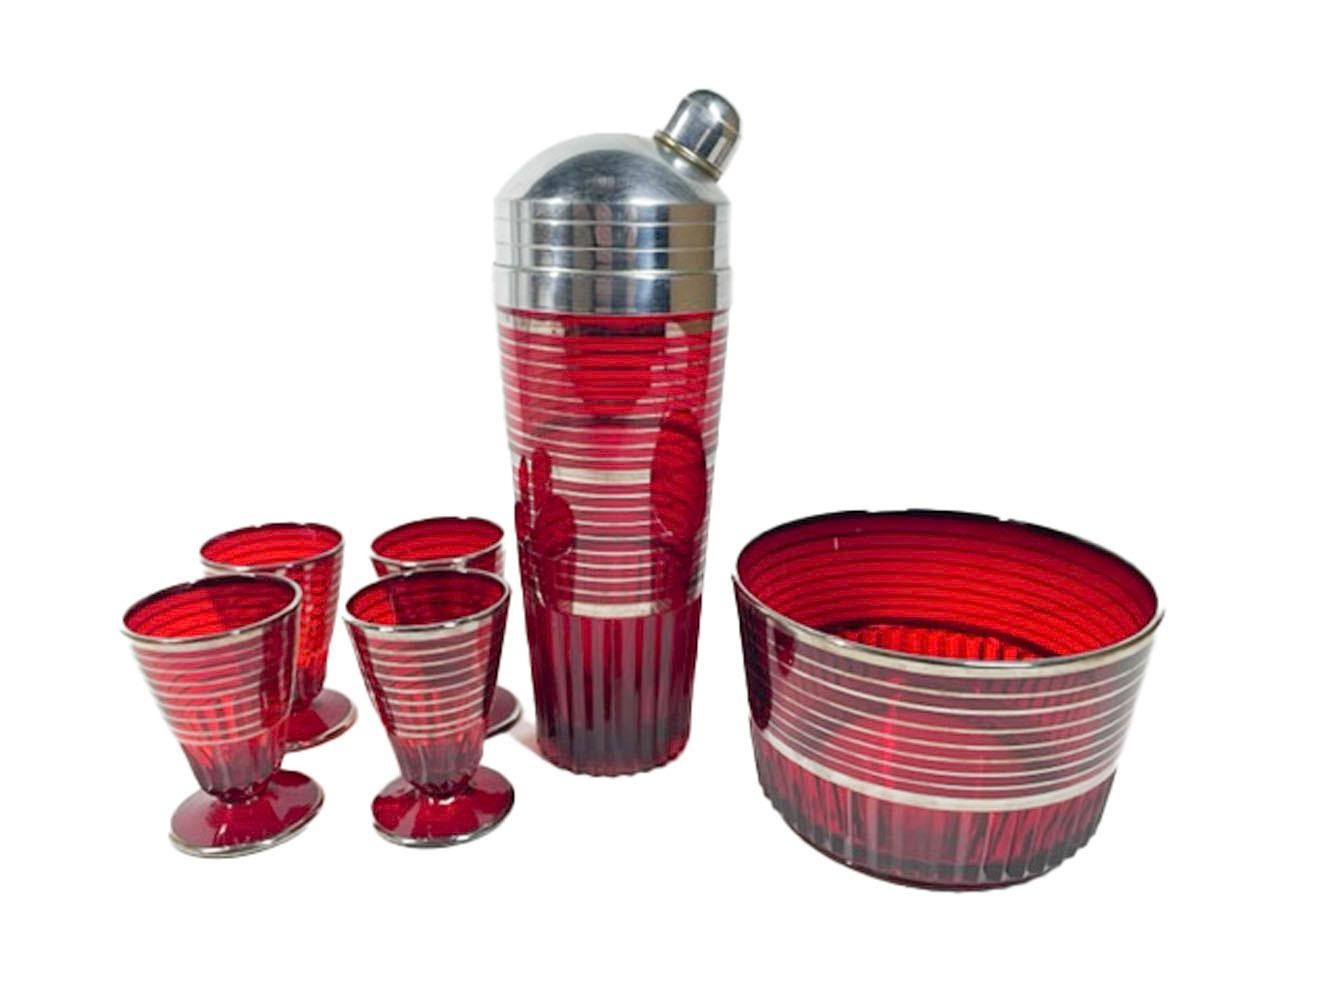 Art Deco cocktail set in the Glades pattern by Paden City Glass. Ruby glass with silver rings above a rib molded lower section. The set consisting of a Shaker with domed chrome lid, ice bowl and four conical cocktail glasses on a circular